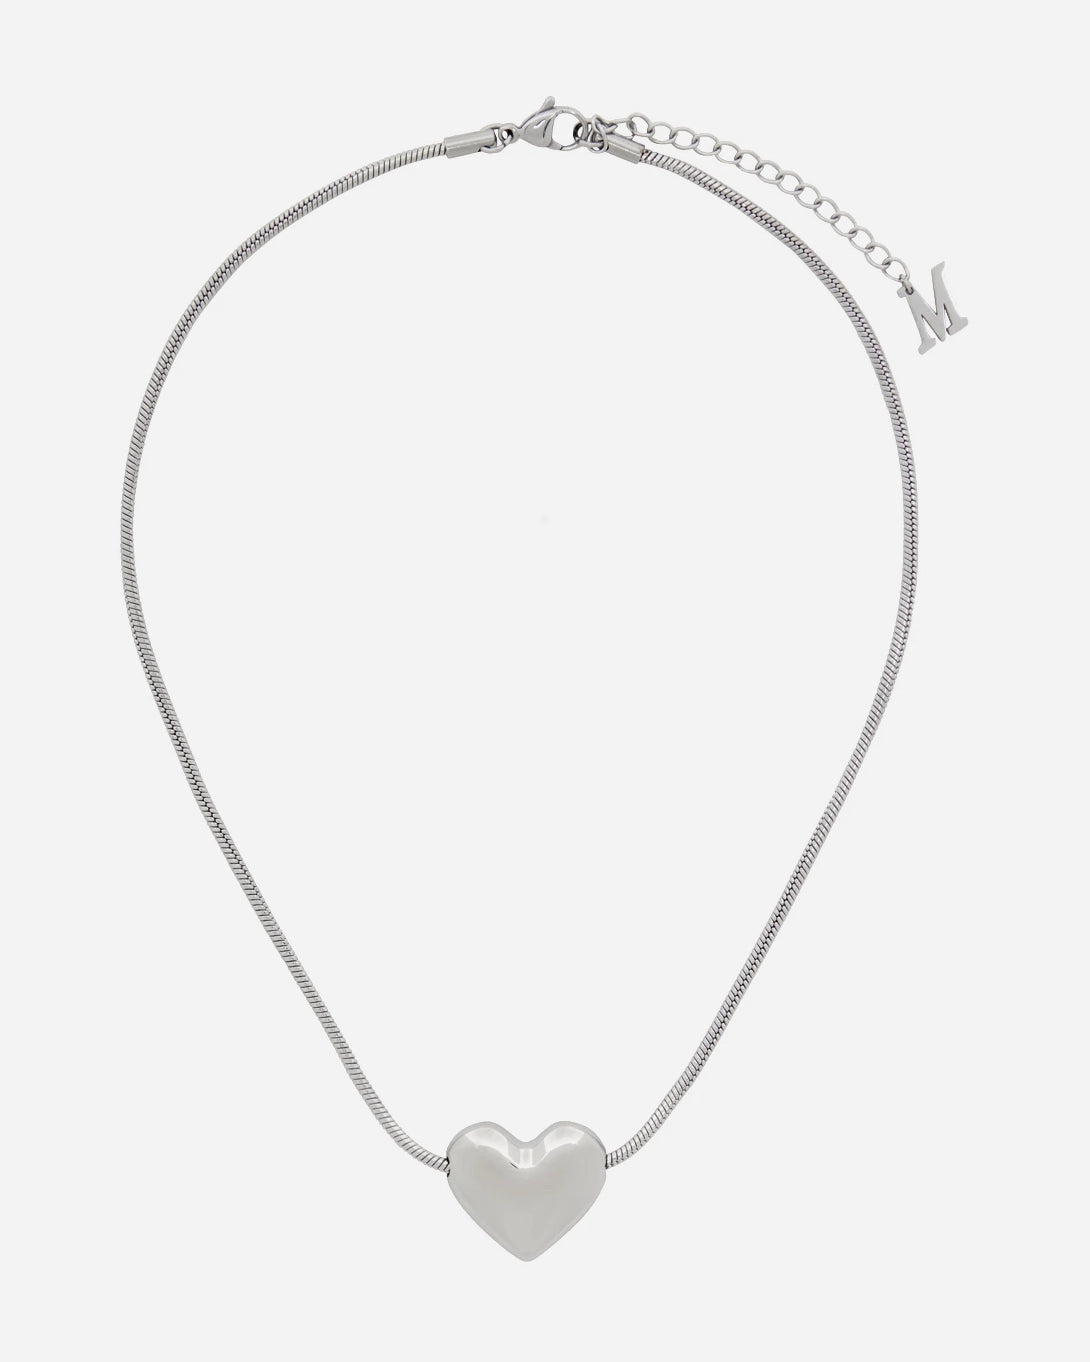 Stainless Steel Marland Backus Lonely Heart Necklace